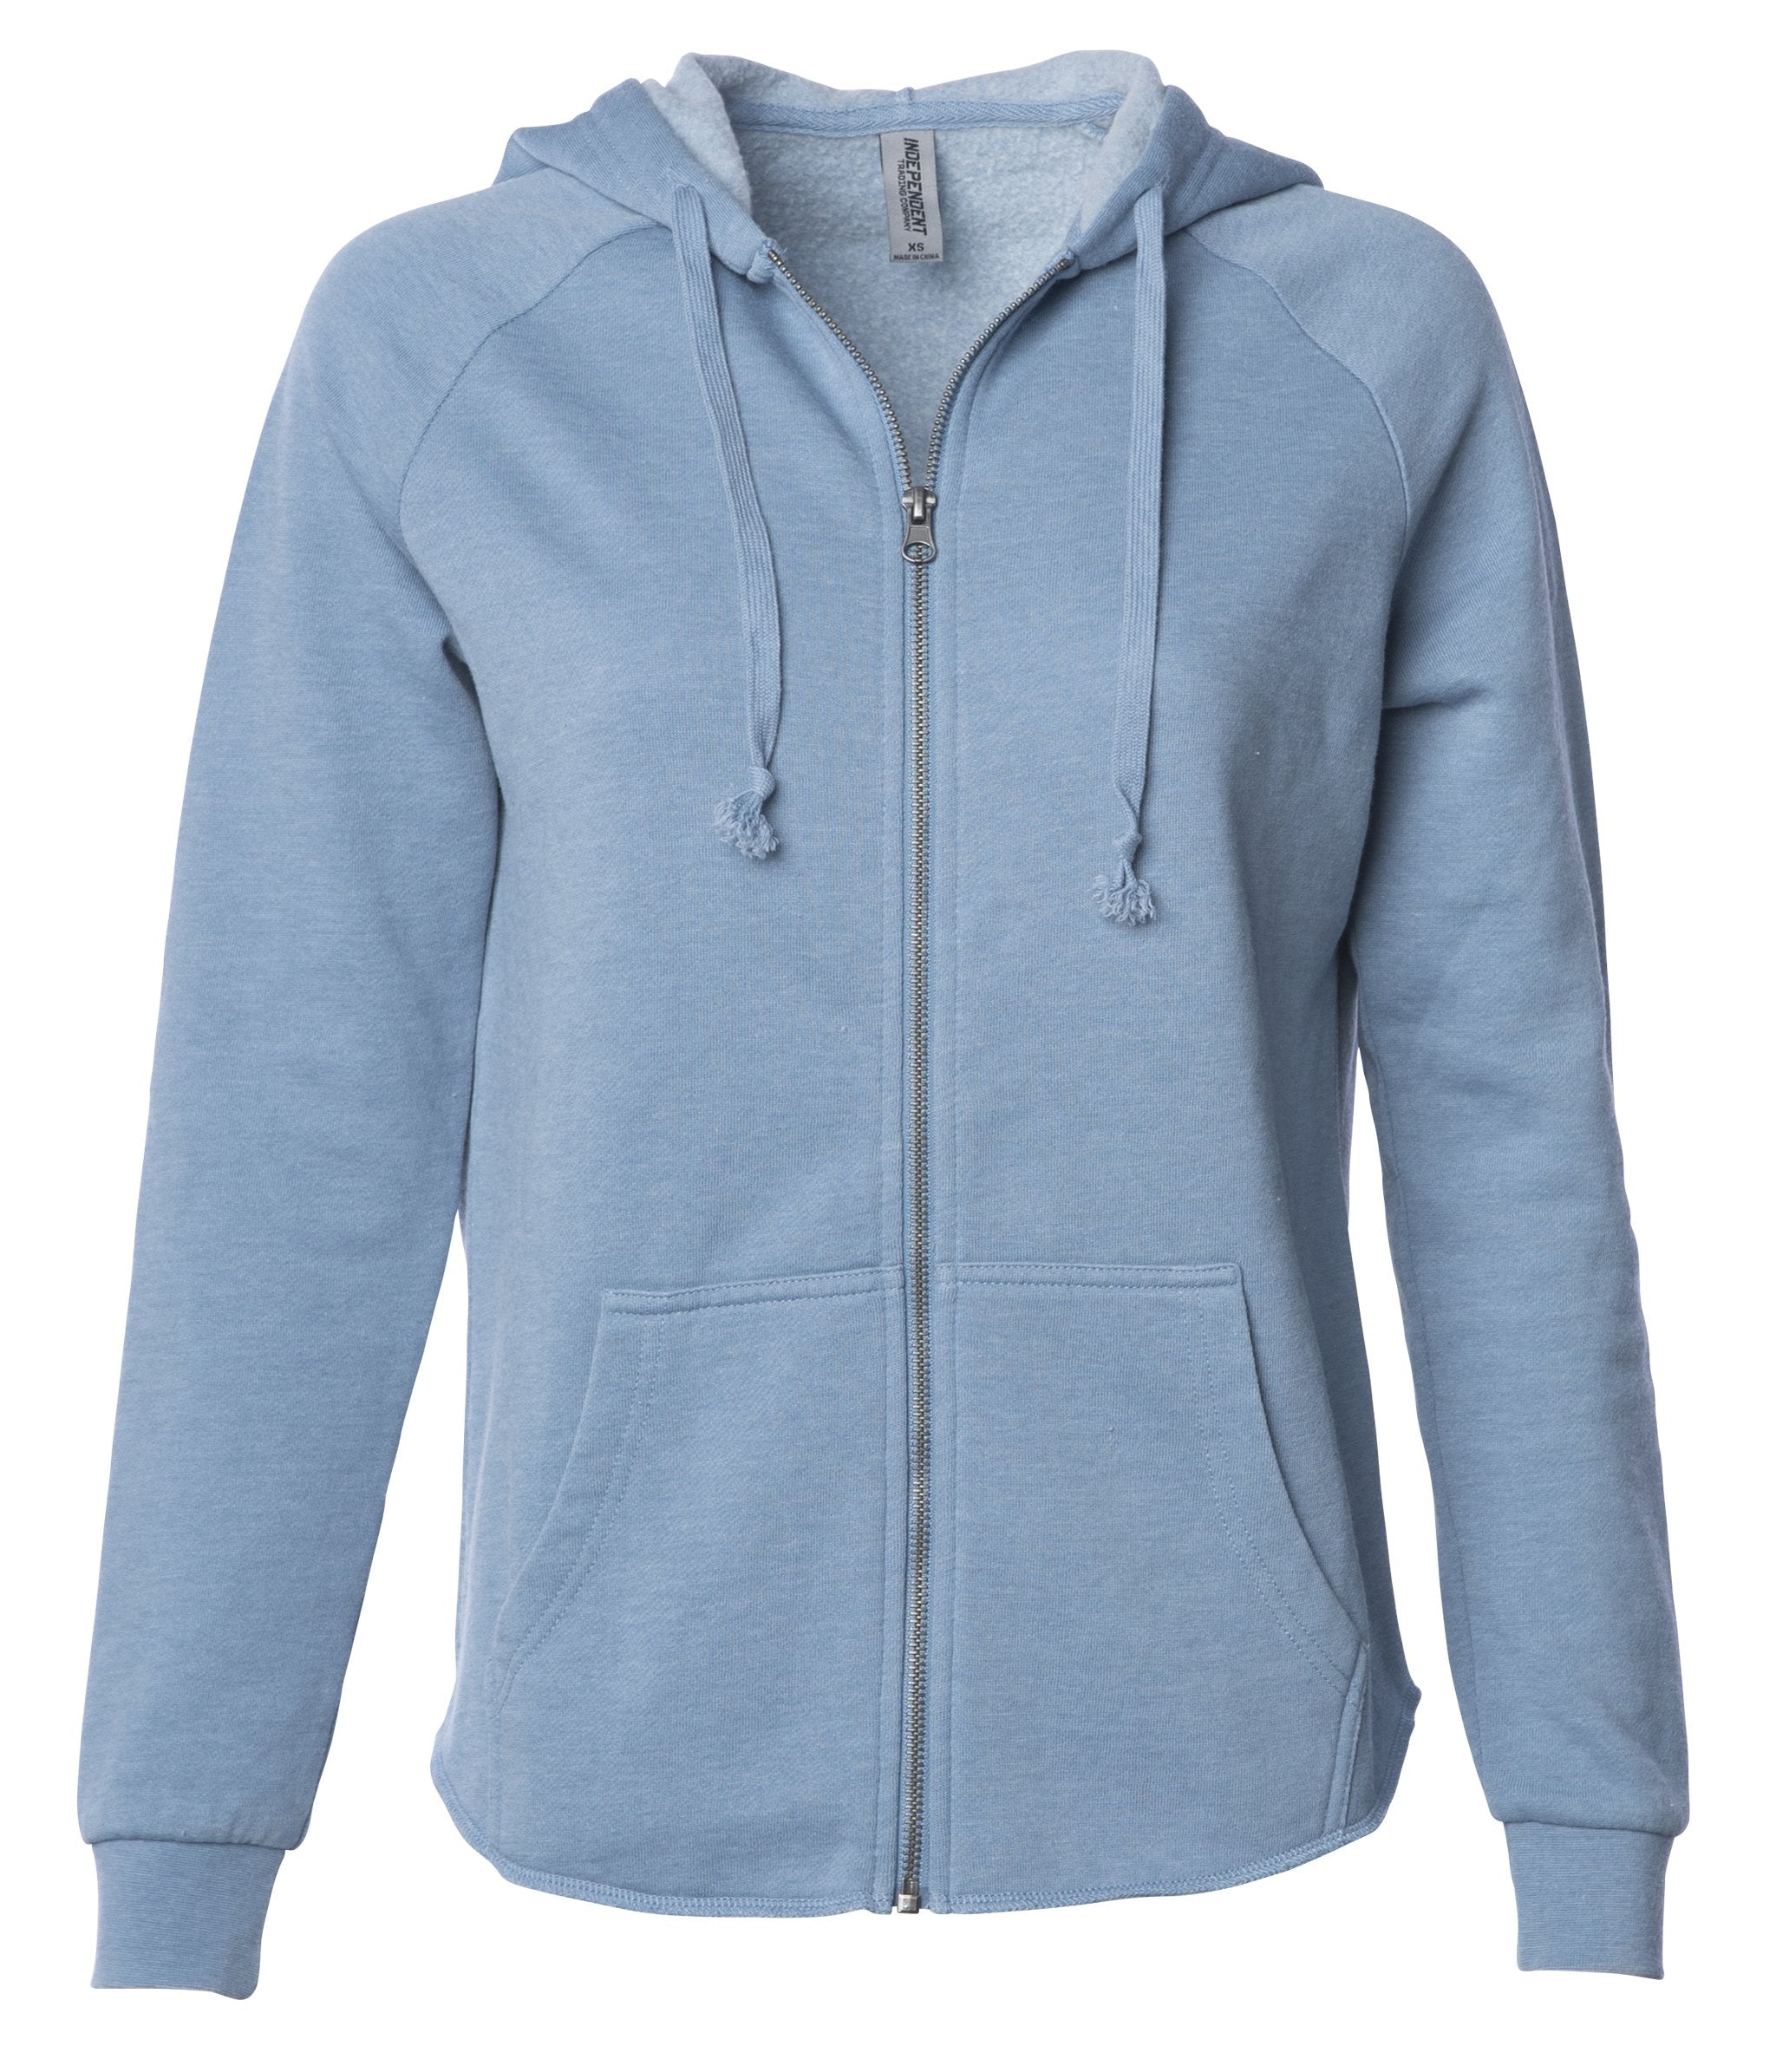  VREWARE womens oversized hoodies fall,women,sales today deals  prime under 10,sweatshirt for deals of today prime clearance,cheap items  under 1,deliveries today on my orders A-blue : Clothing, Shoes & Jewelry